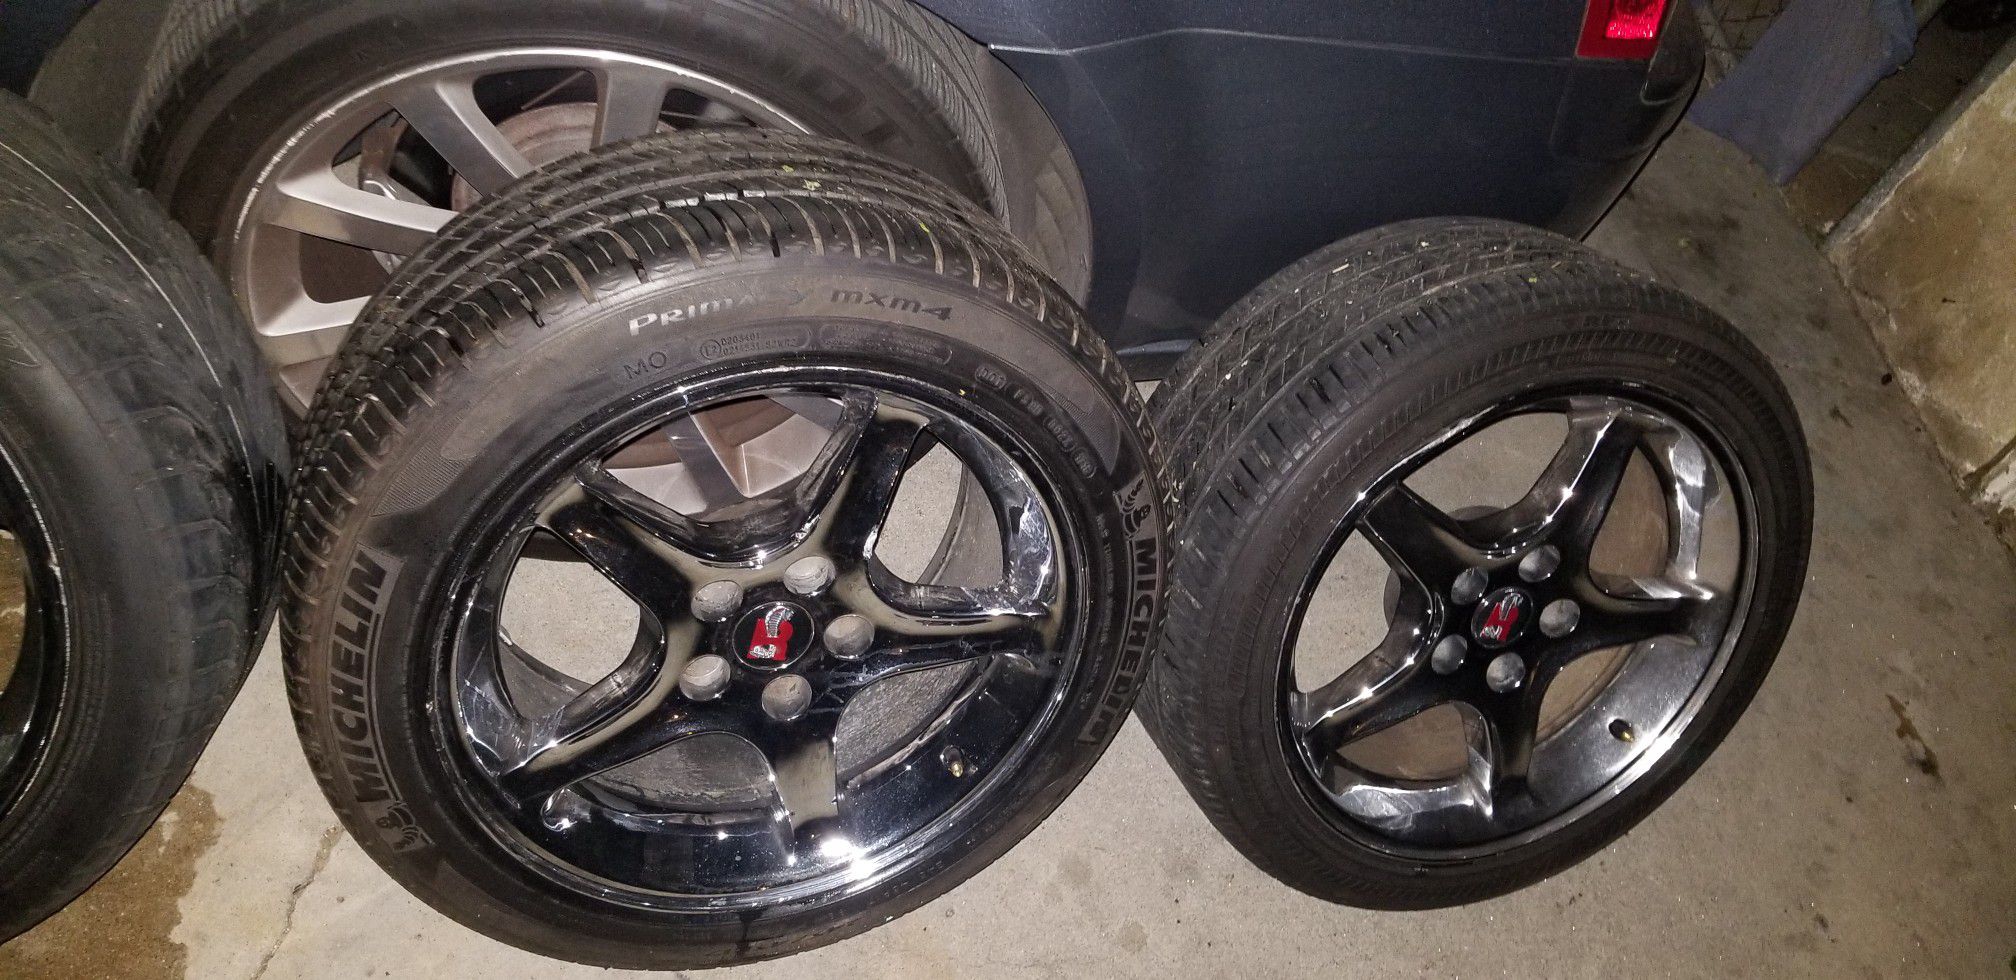 Set de rines mustang cobra 17' two tires like new the other 2 used